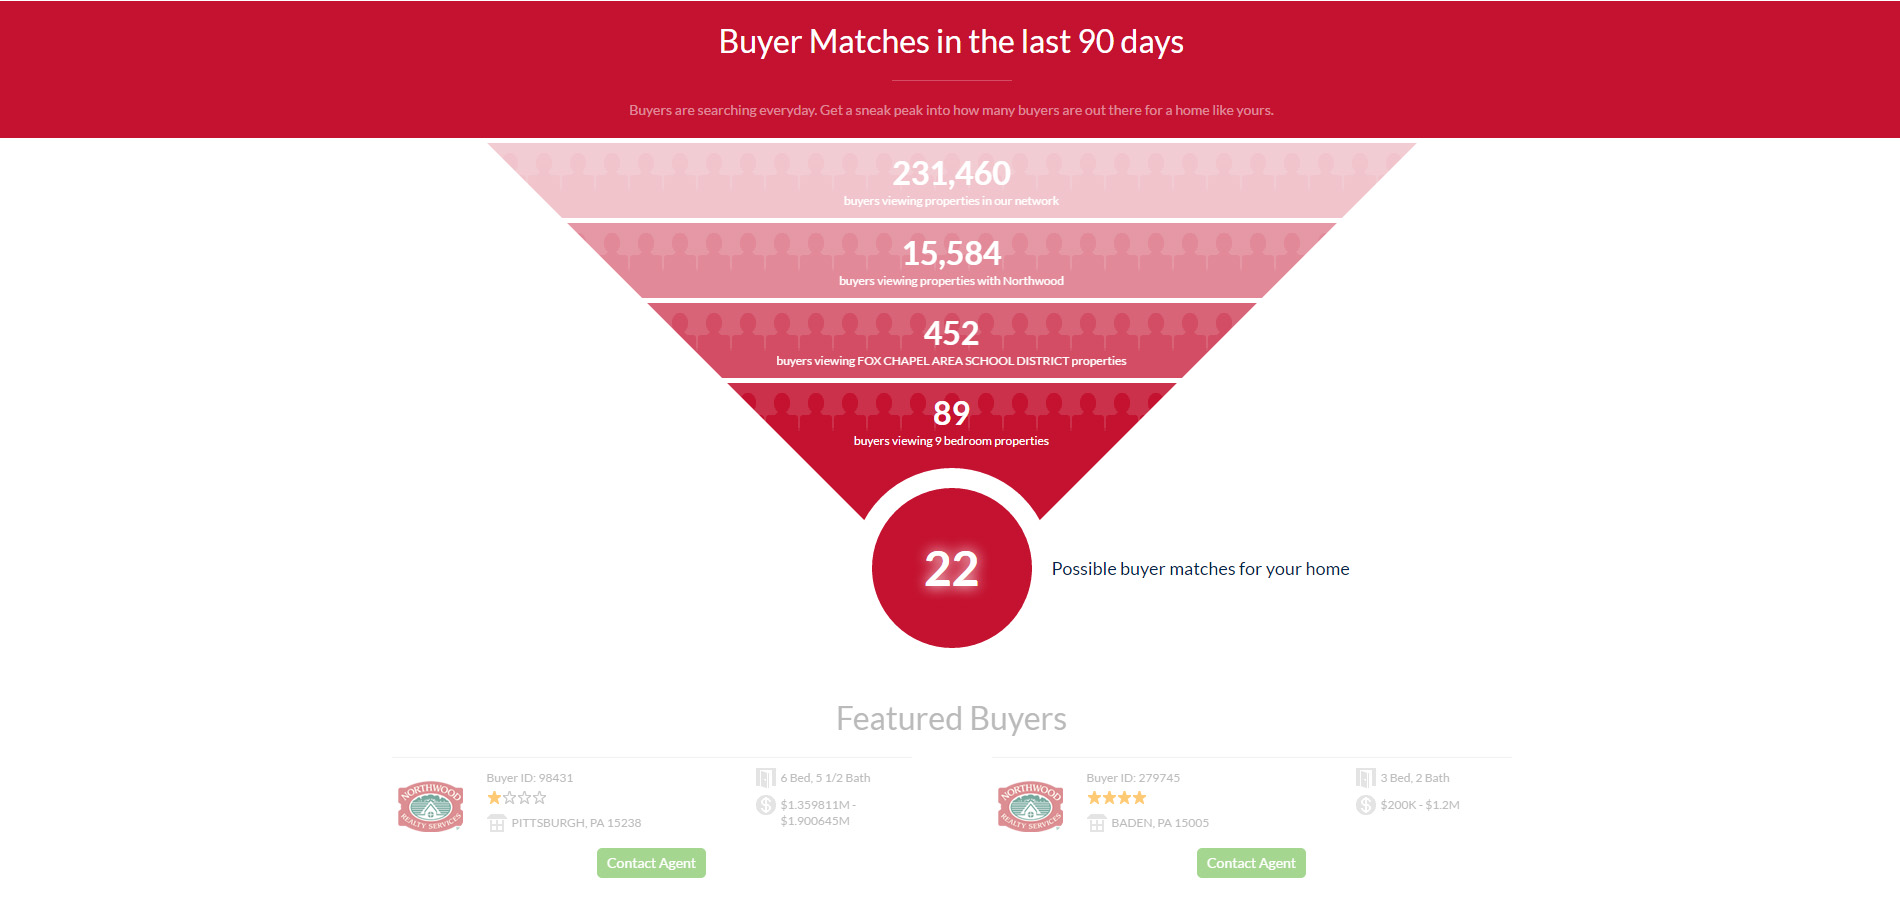 Northwood’s Find Buyers property search shows a statistical funnel of how many interested home buyers have been searching within the last 90 days.